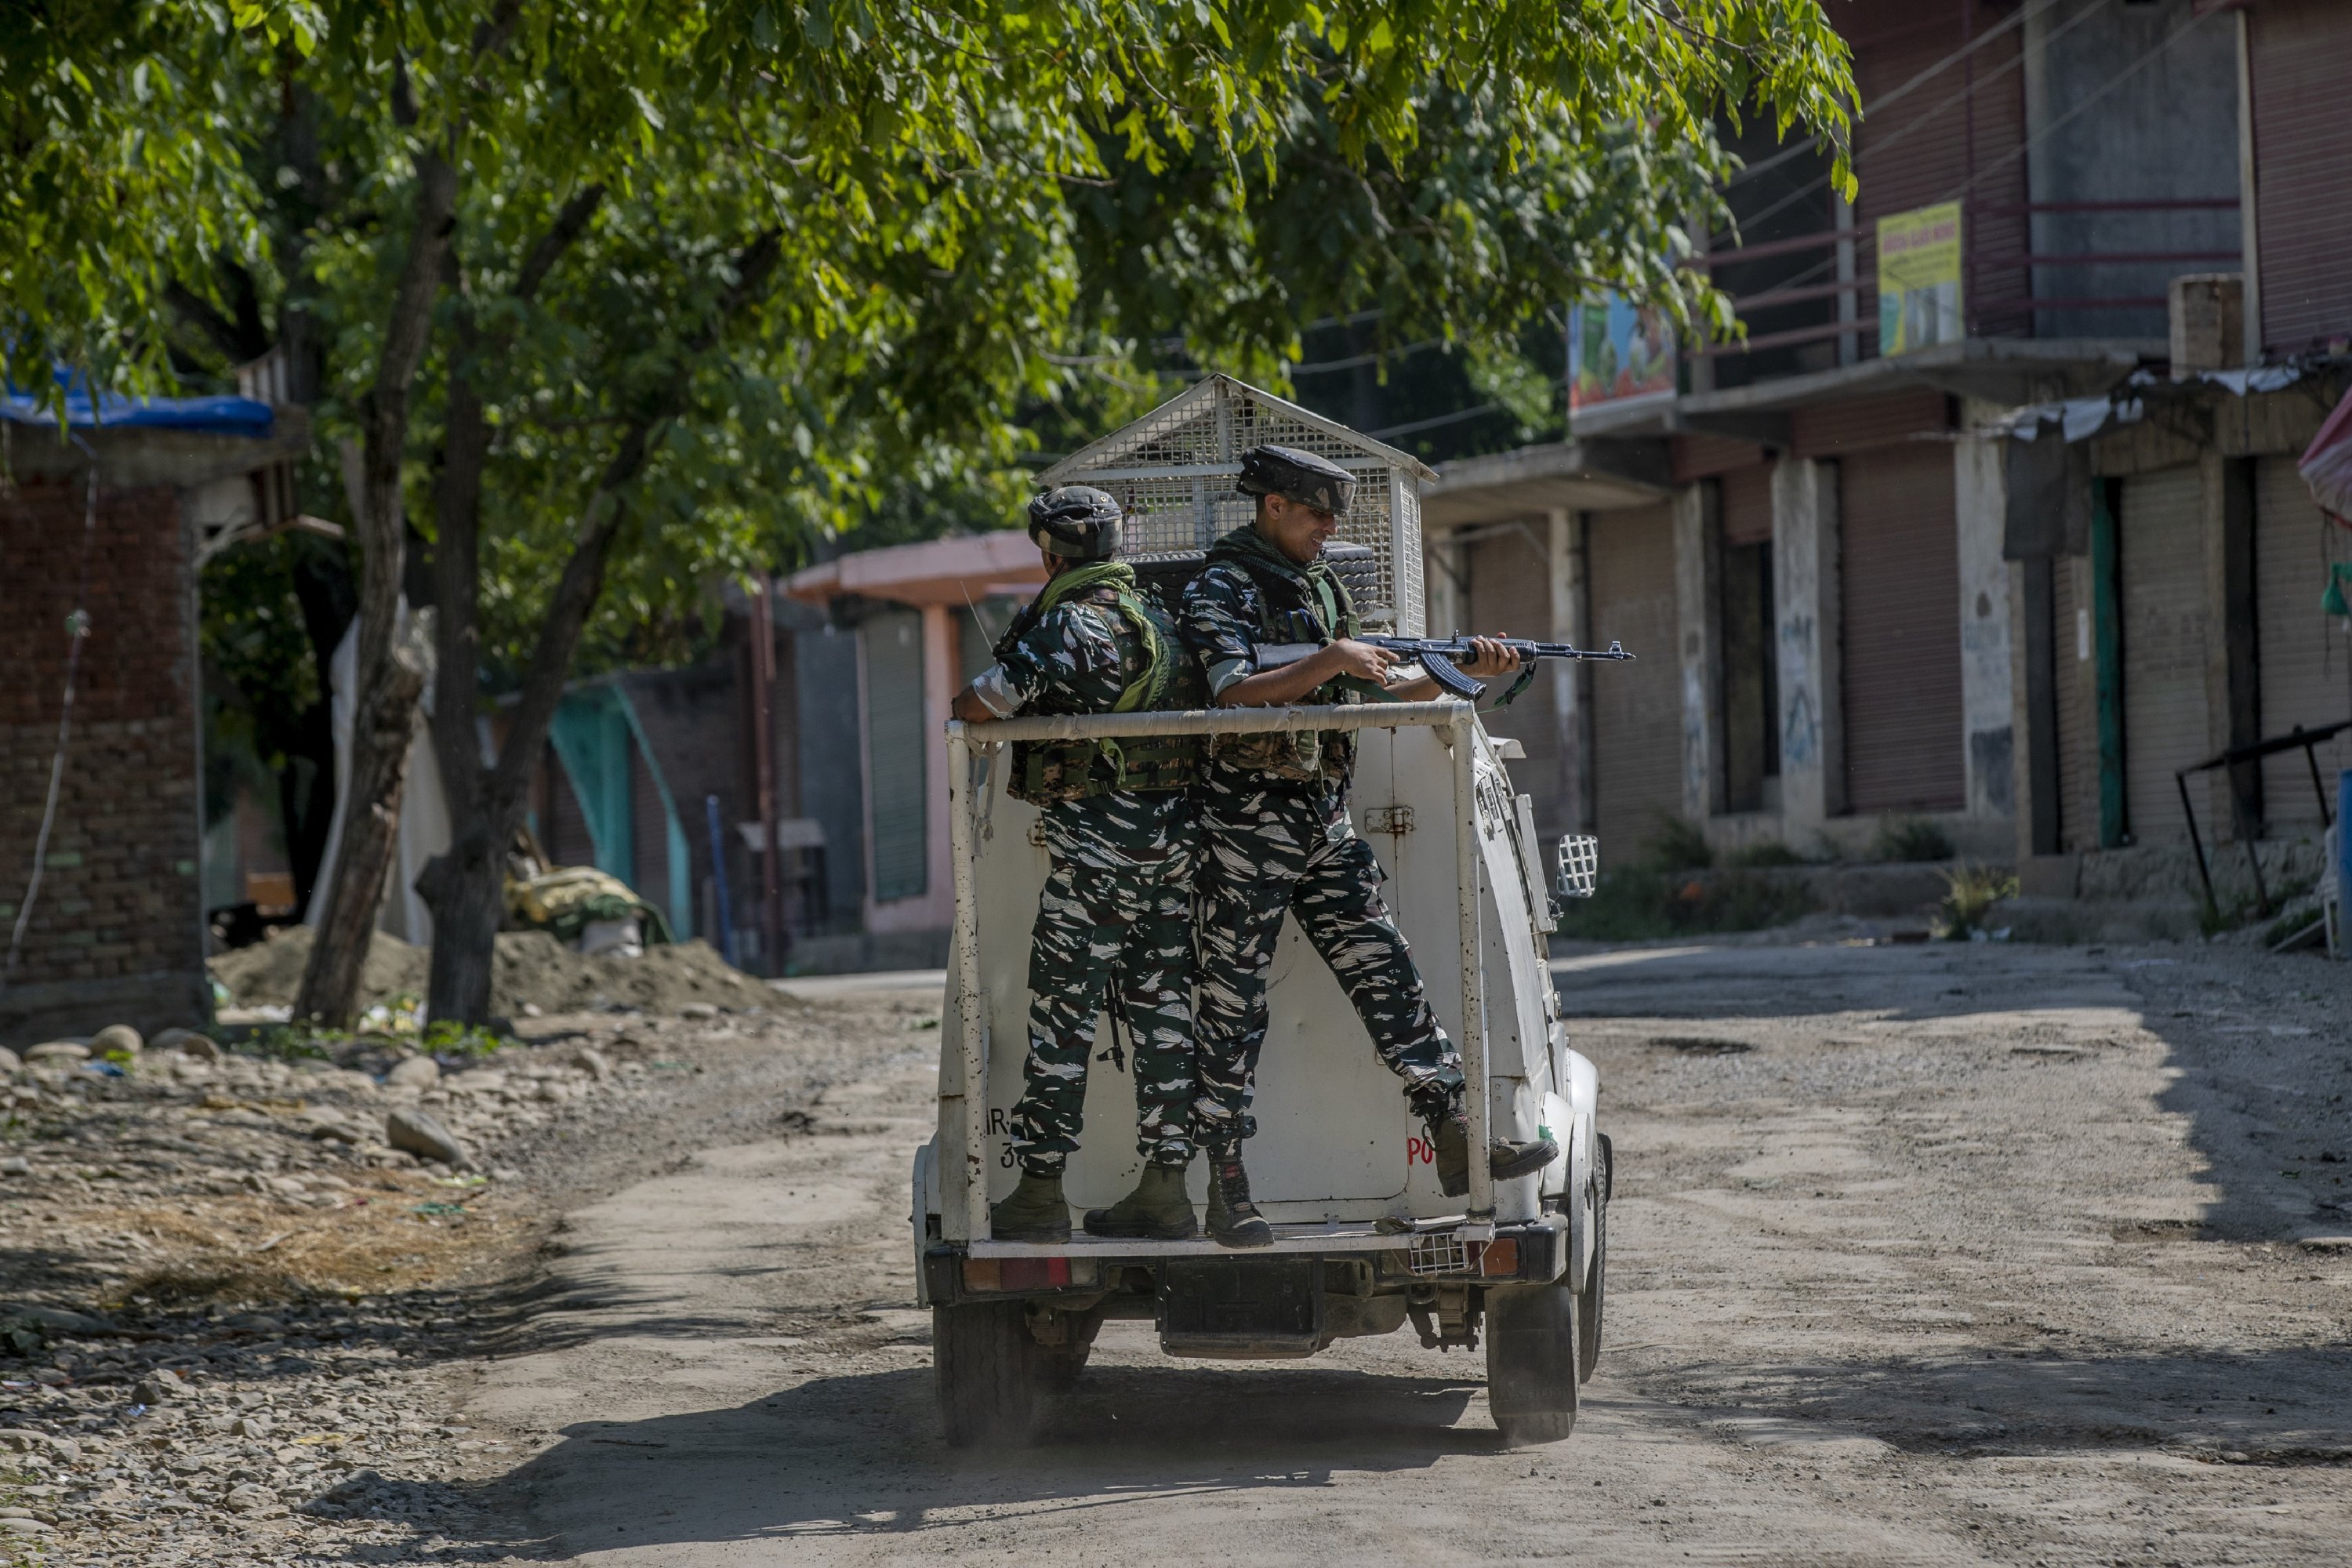 Indian paramilitary soldiers stand guard on an armored vehicle as they move toward the site of a gunfight in Pulwama, south of Srinagar, Indian-controlled Kashmir, July 2, 2021. (AP Photo)